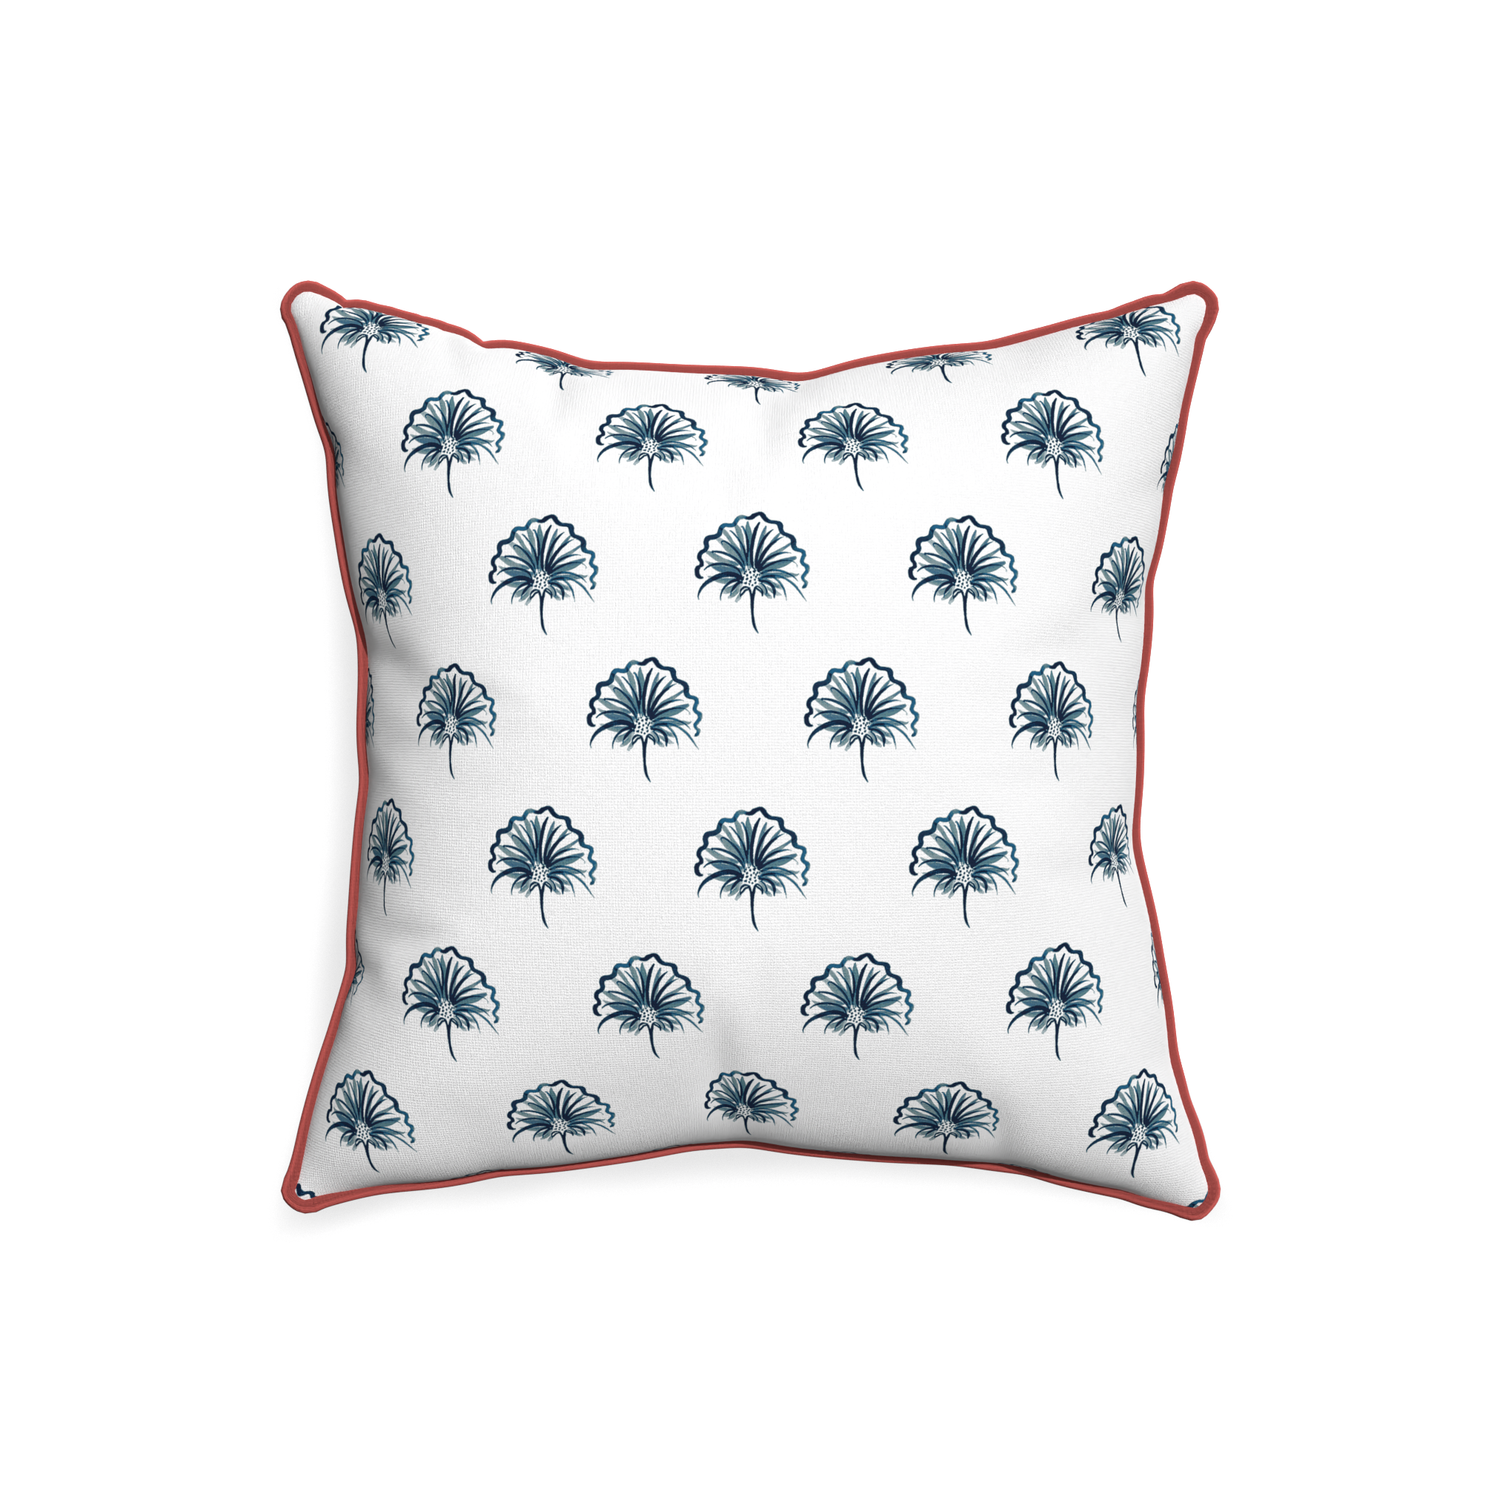 20-square penelope midnight custom pillow with c piping on white background